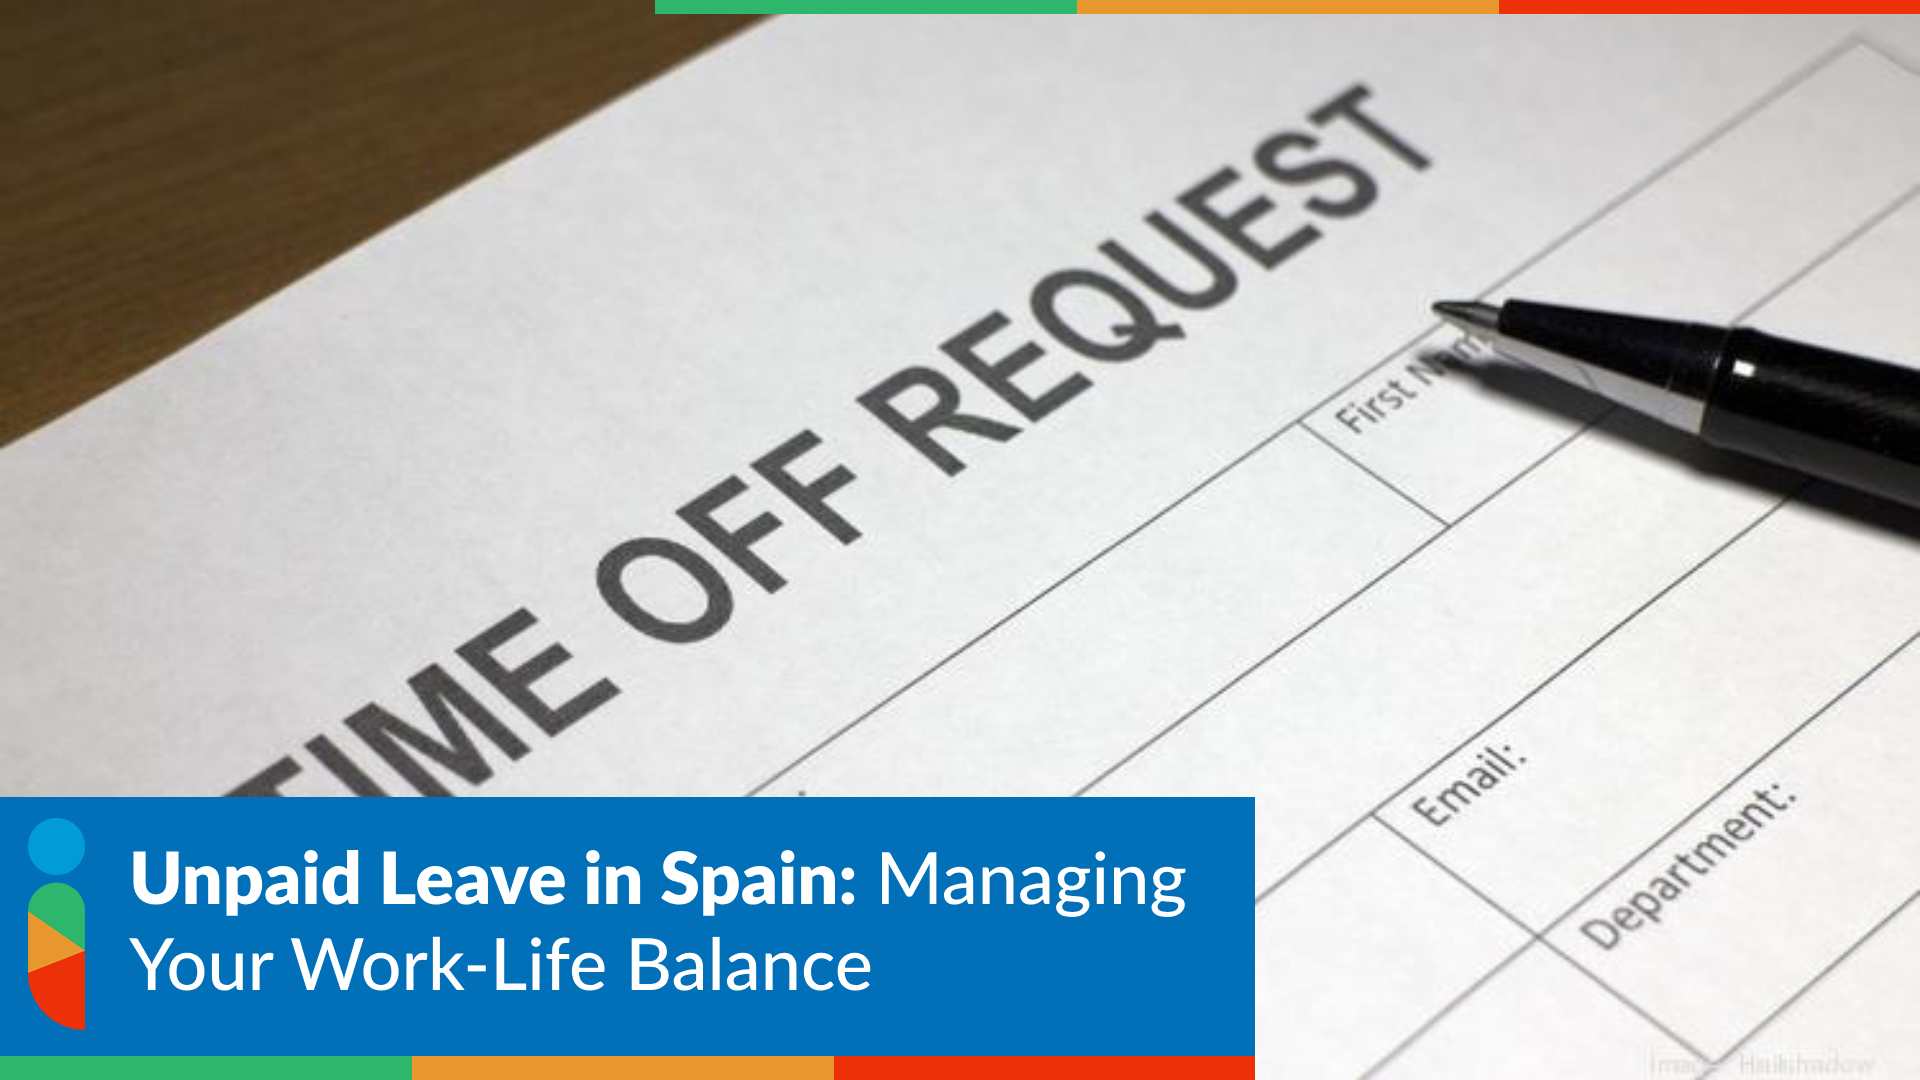 Unpaid Leave in Spain: Managing Your Work-Life Balance